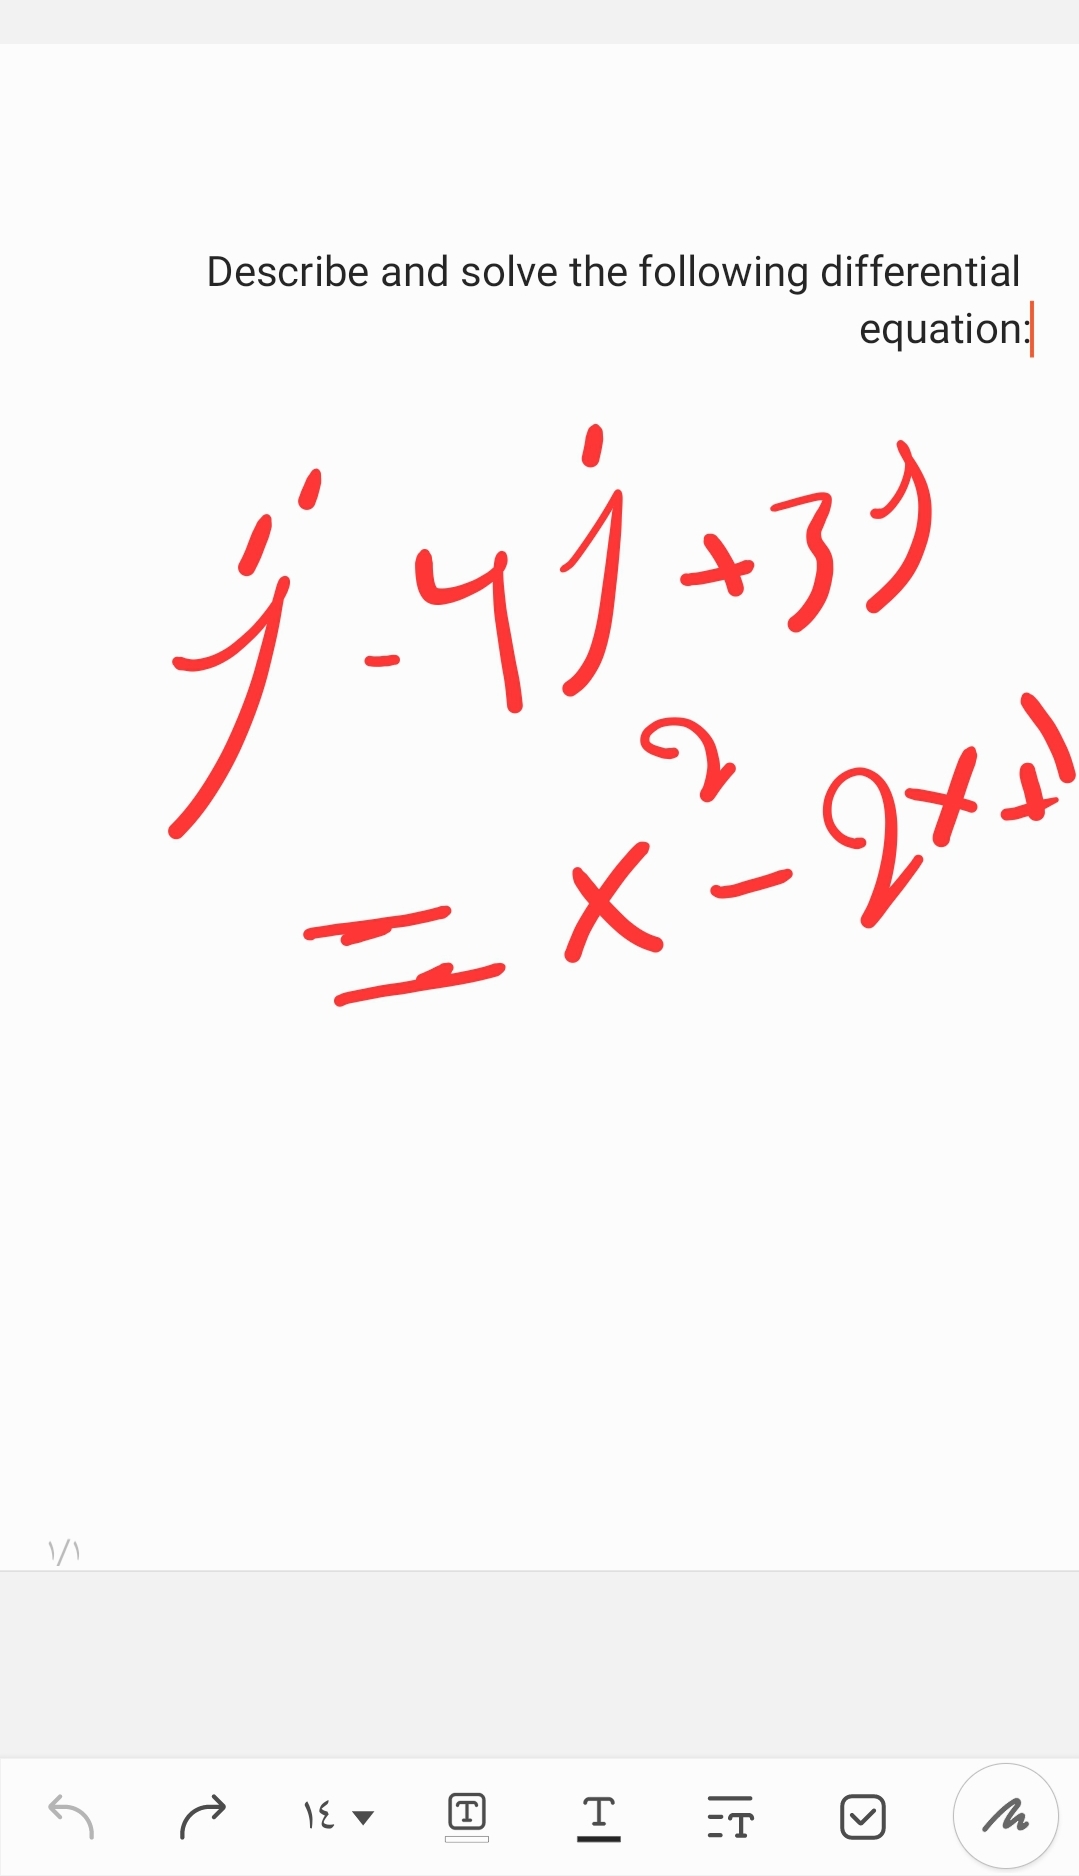 Describe and solve the following differential
₤-41 +3)
equation:
=x=2x+1
۱/۱
12-
[T
O
Τ
e|
Τ
TH
>
M